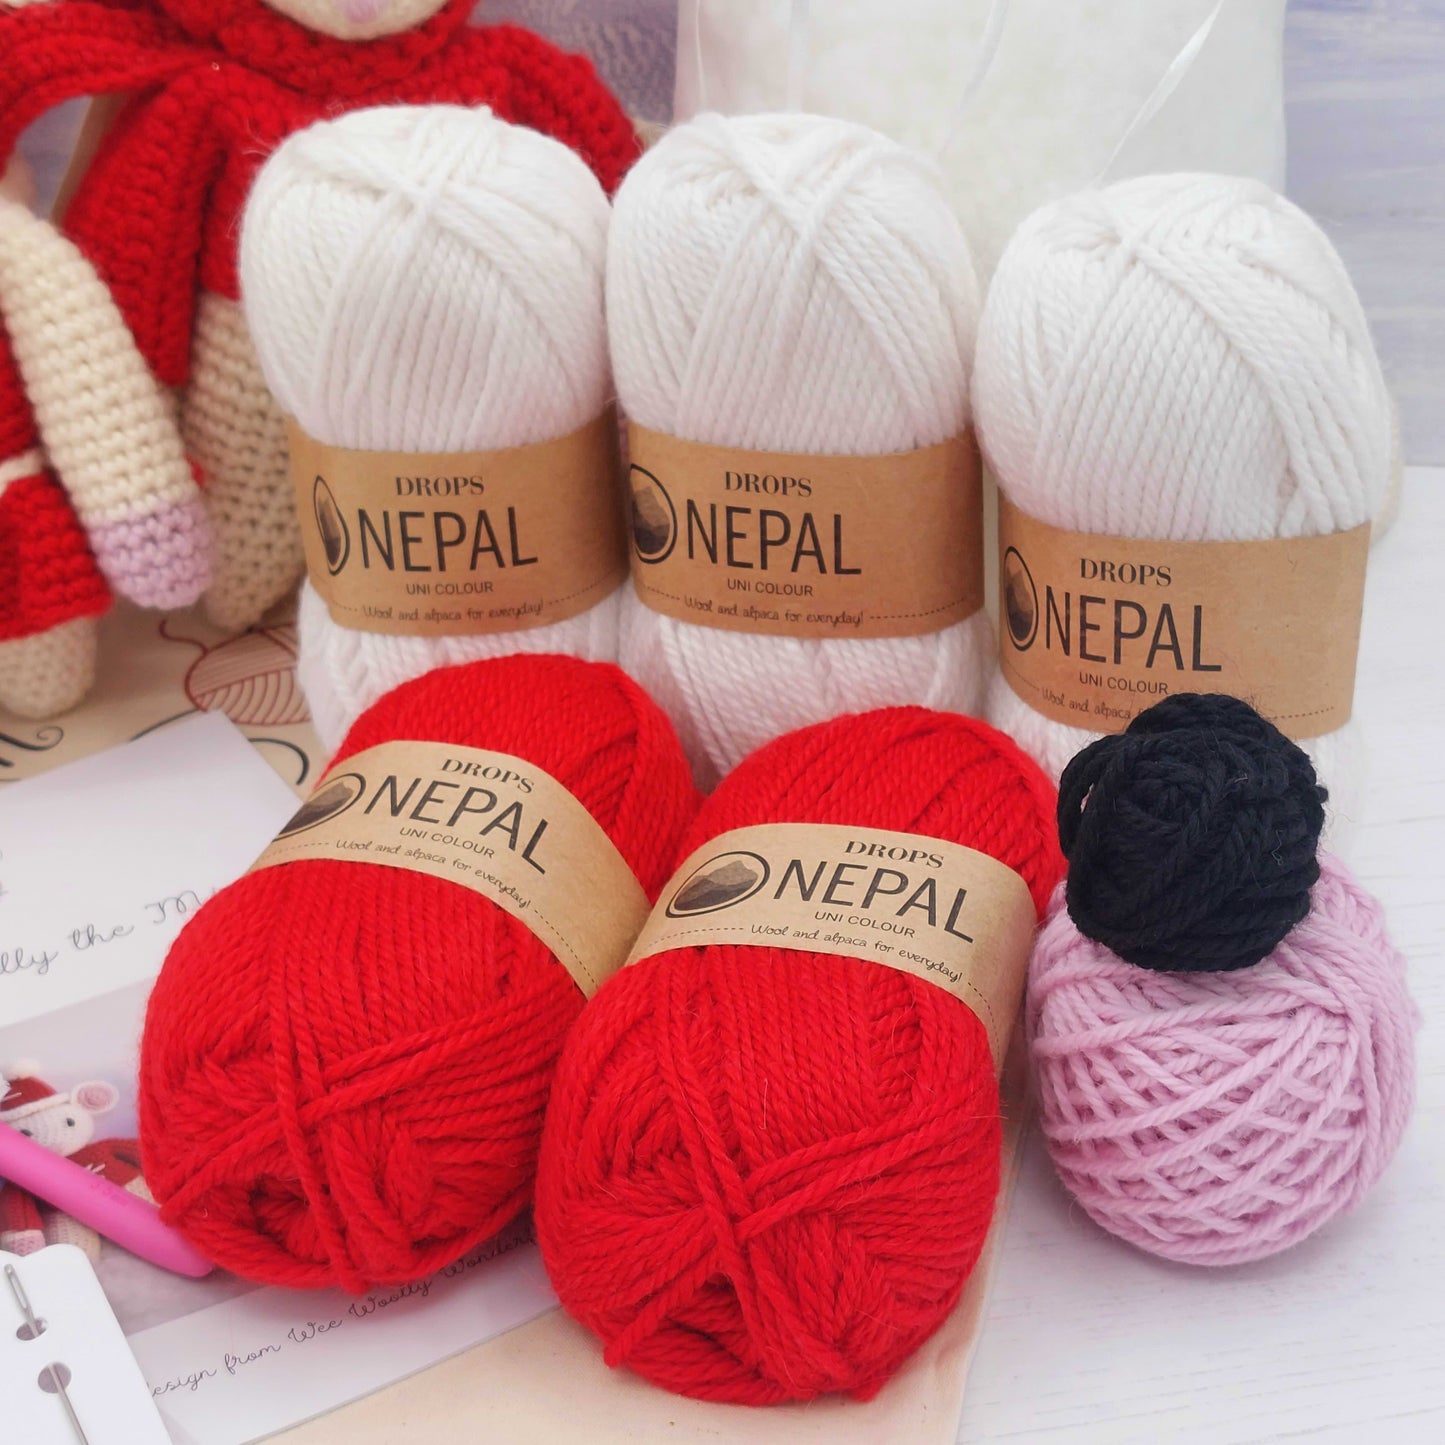 White and red balls of wool